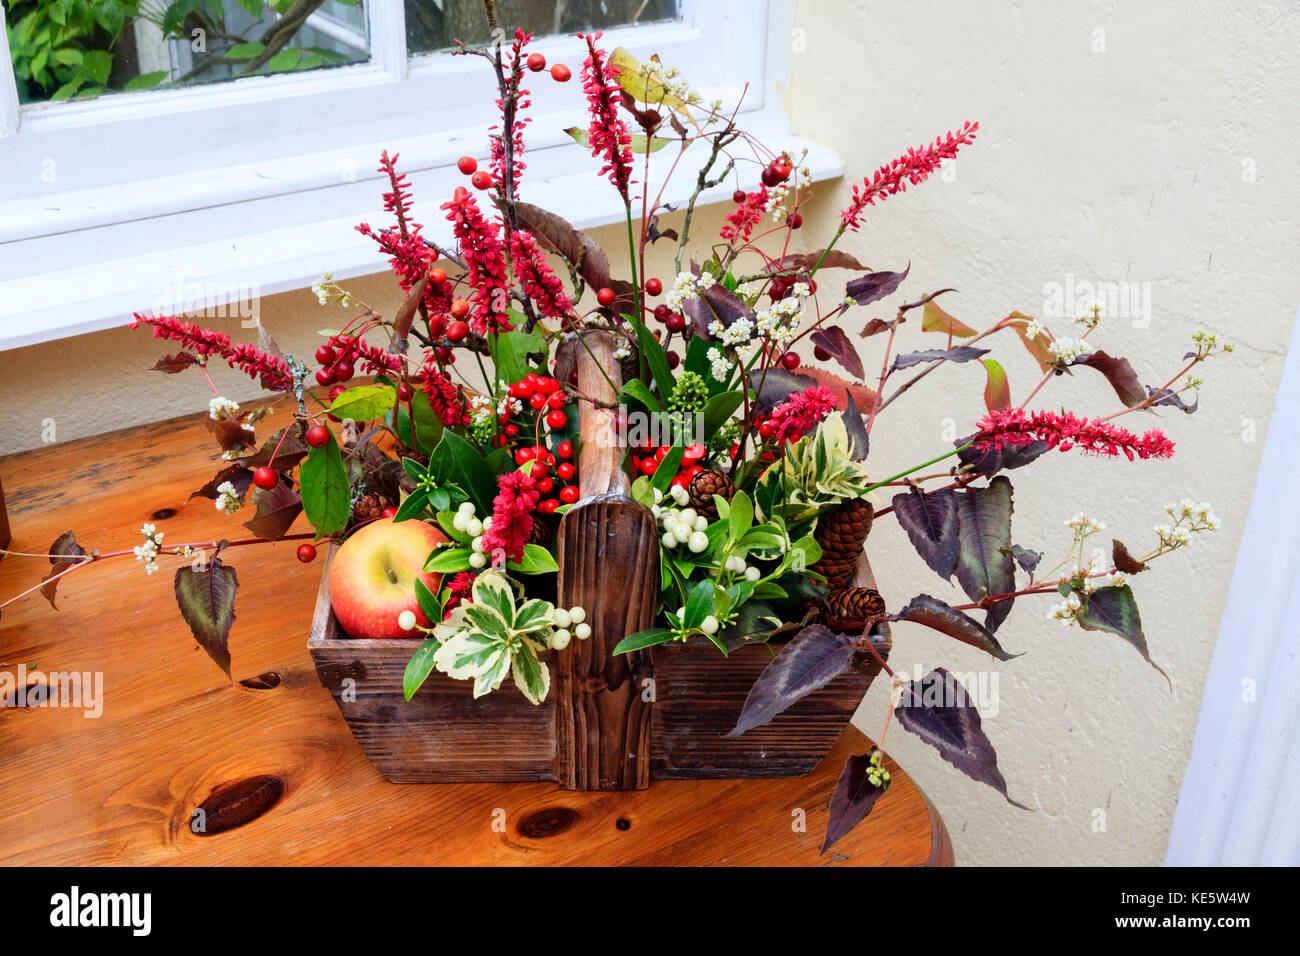 Autumn table decoration of red and white berried Skimmia, Persicaria flowers and foliage, and variegated Euonymus in a wooden basket Stock Photo